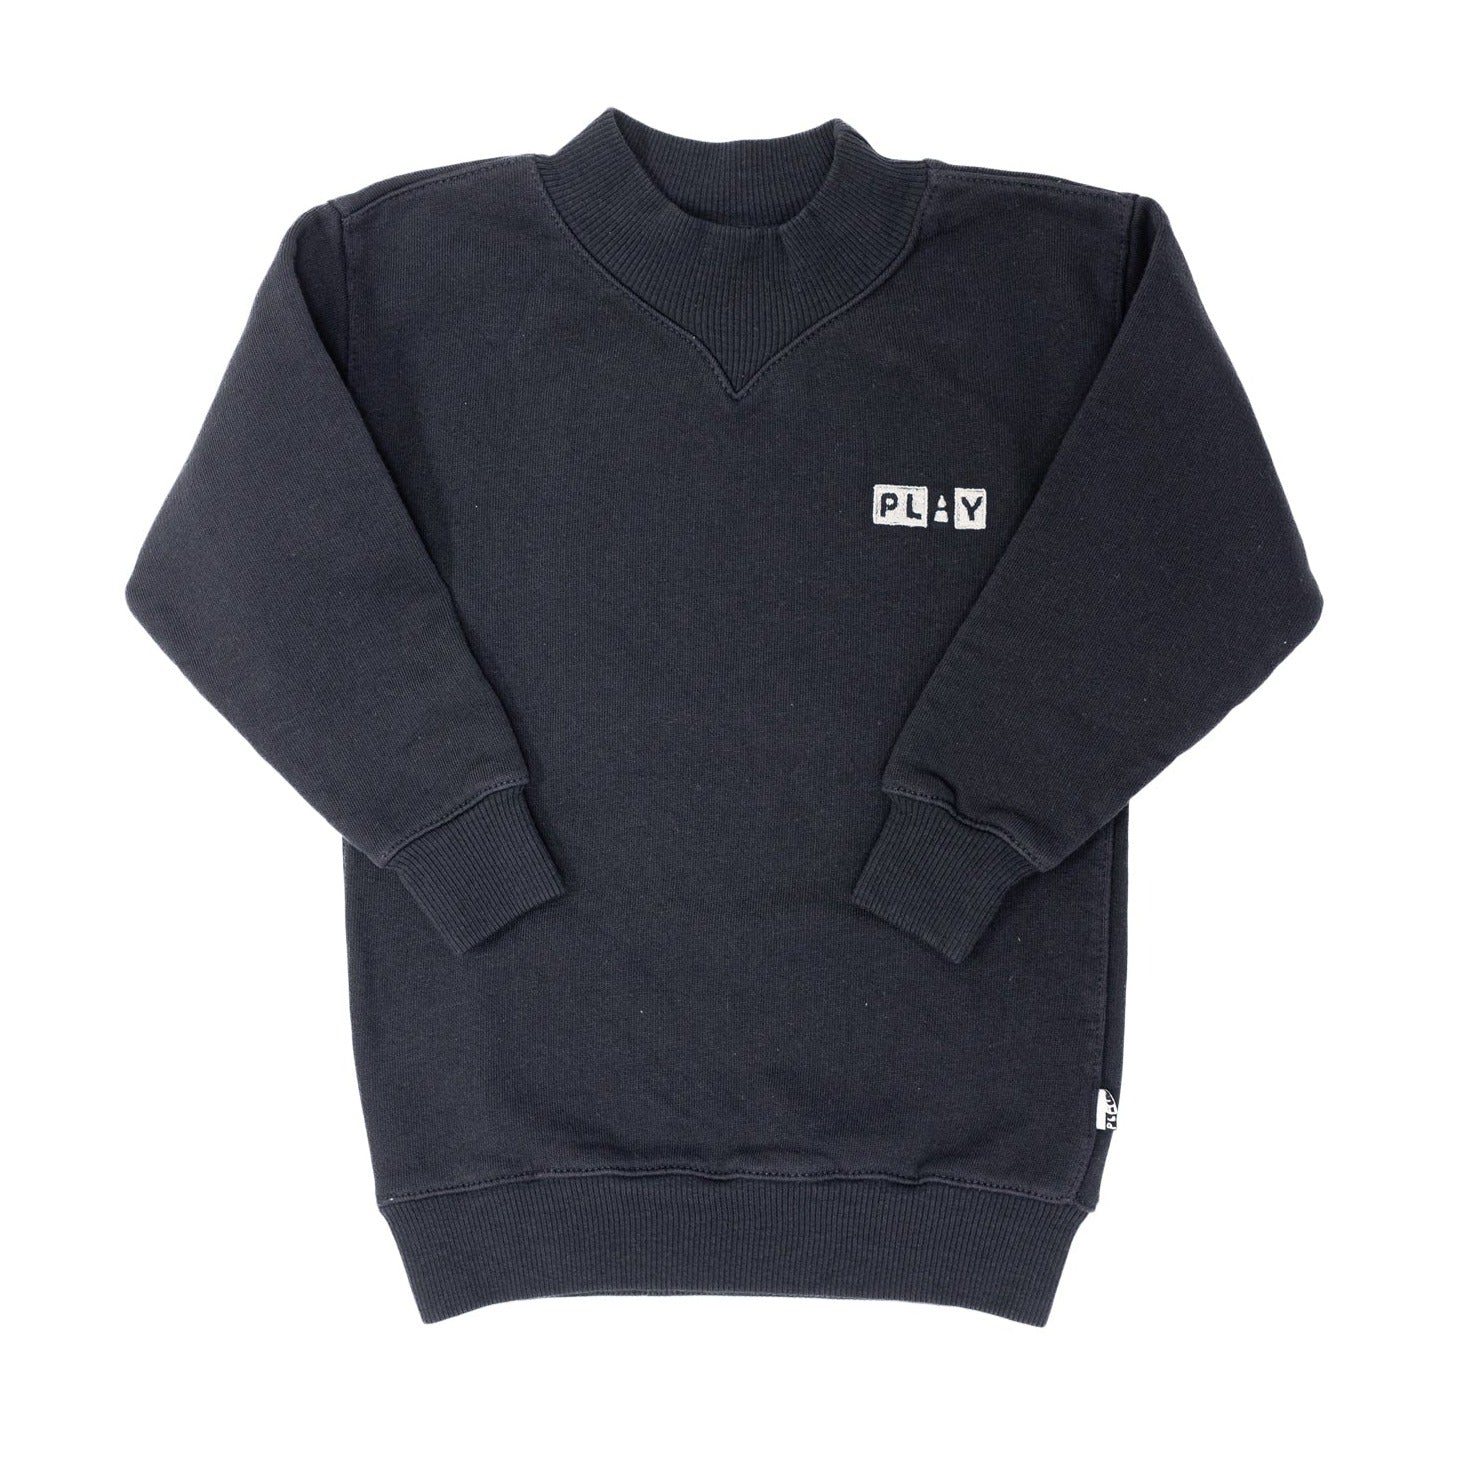 Play Terrible Twos Sweater - Navy